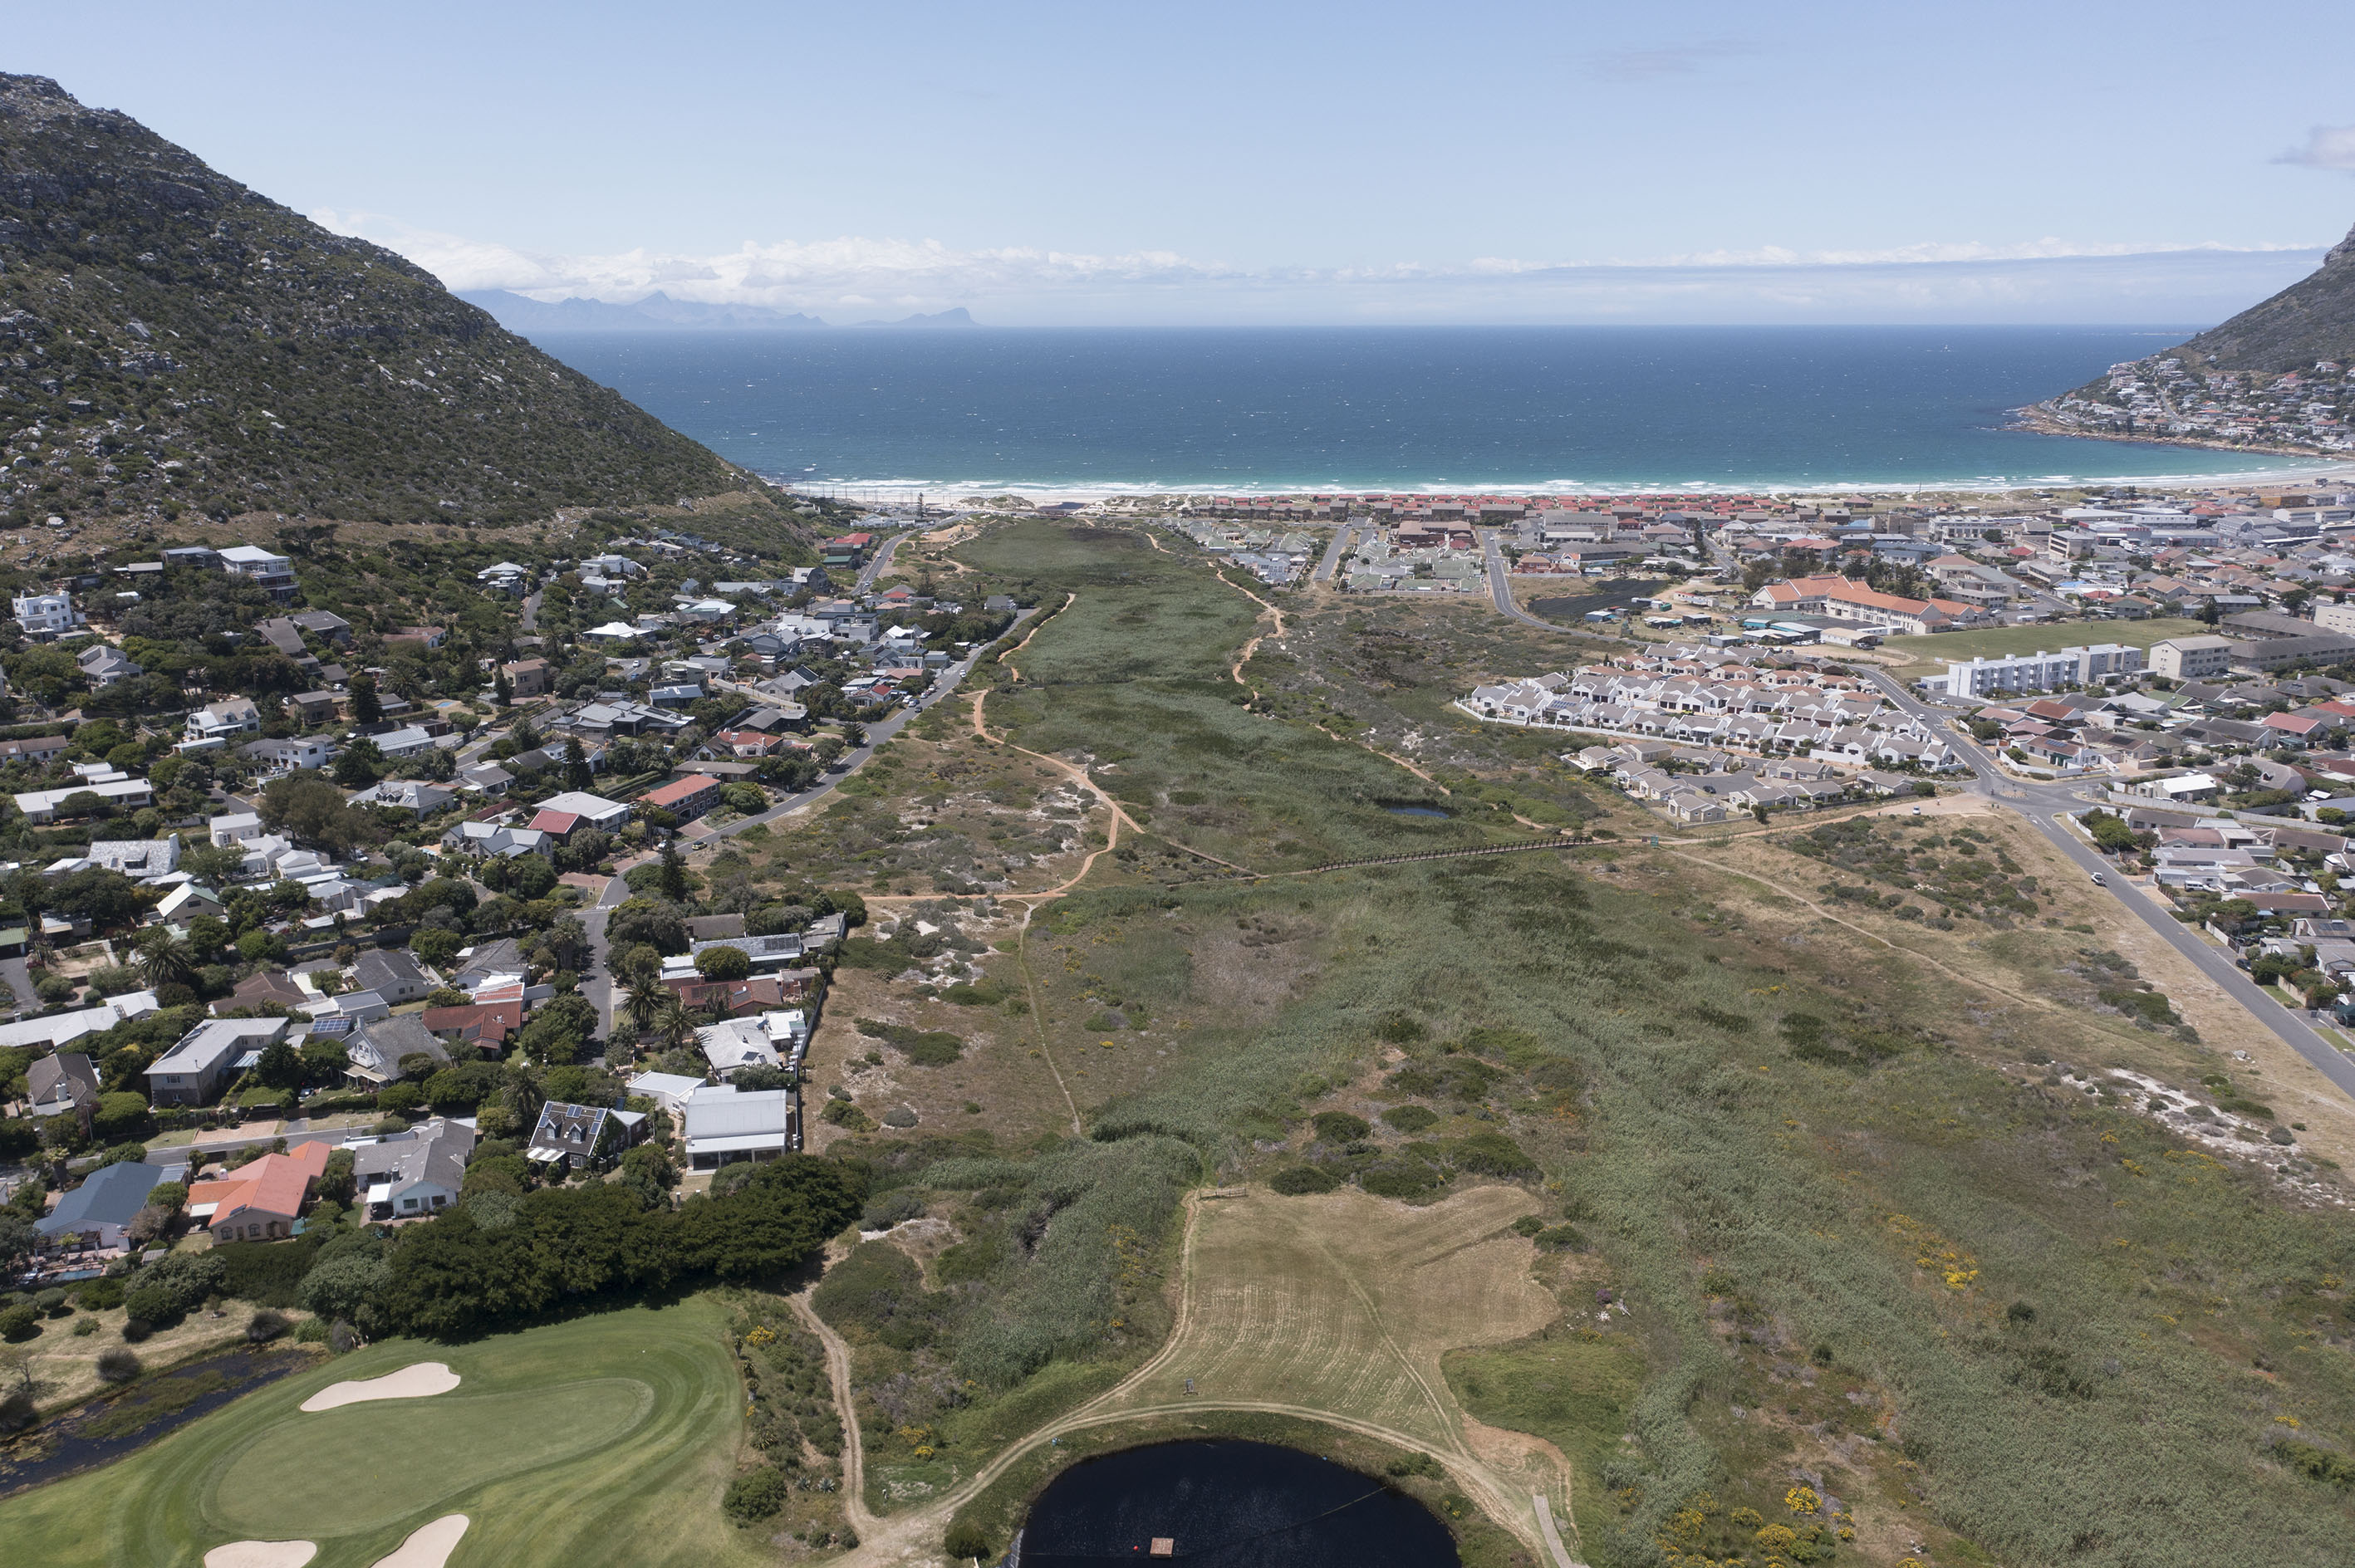 A key rehabilitation project undertaken to provide for a biodiverse and functional amenity for the citizens of Cape Town along the lower reaches of Silvermine River.